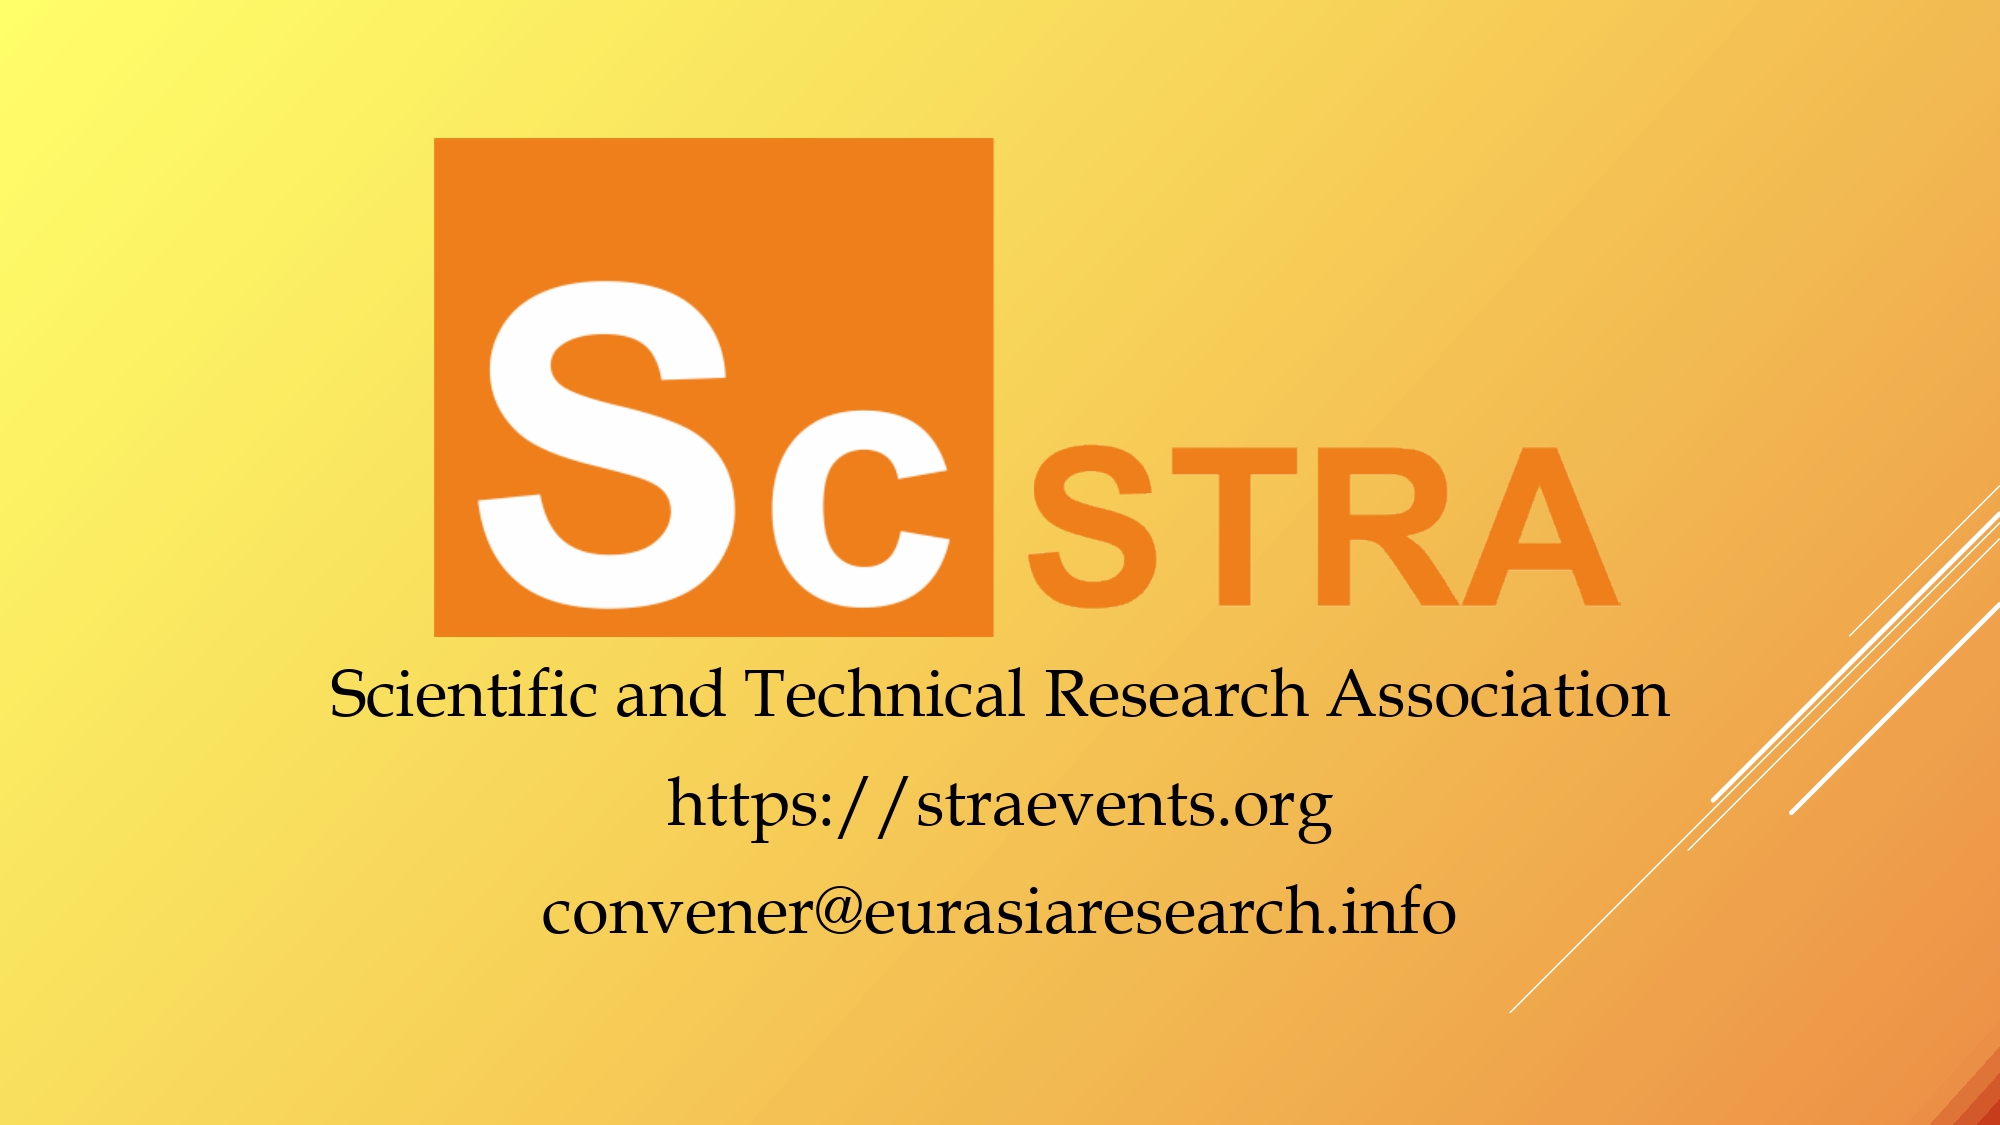 7th ICSTR London – International Conference on Science & Technology Research, 18-19 November 2021, London, United Kingdom